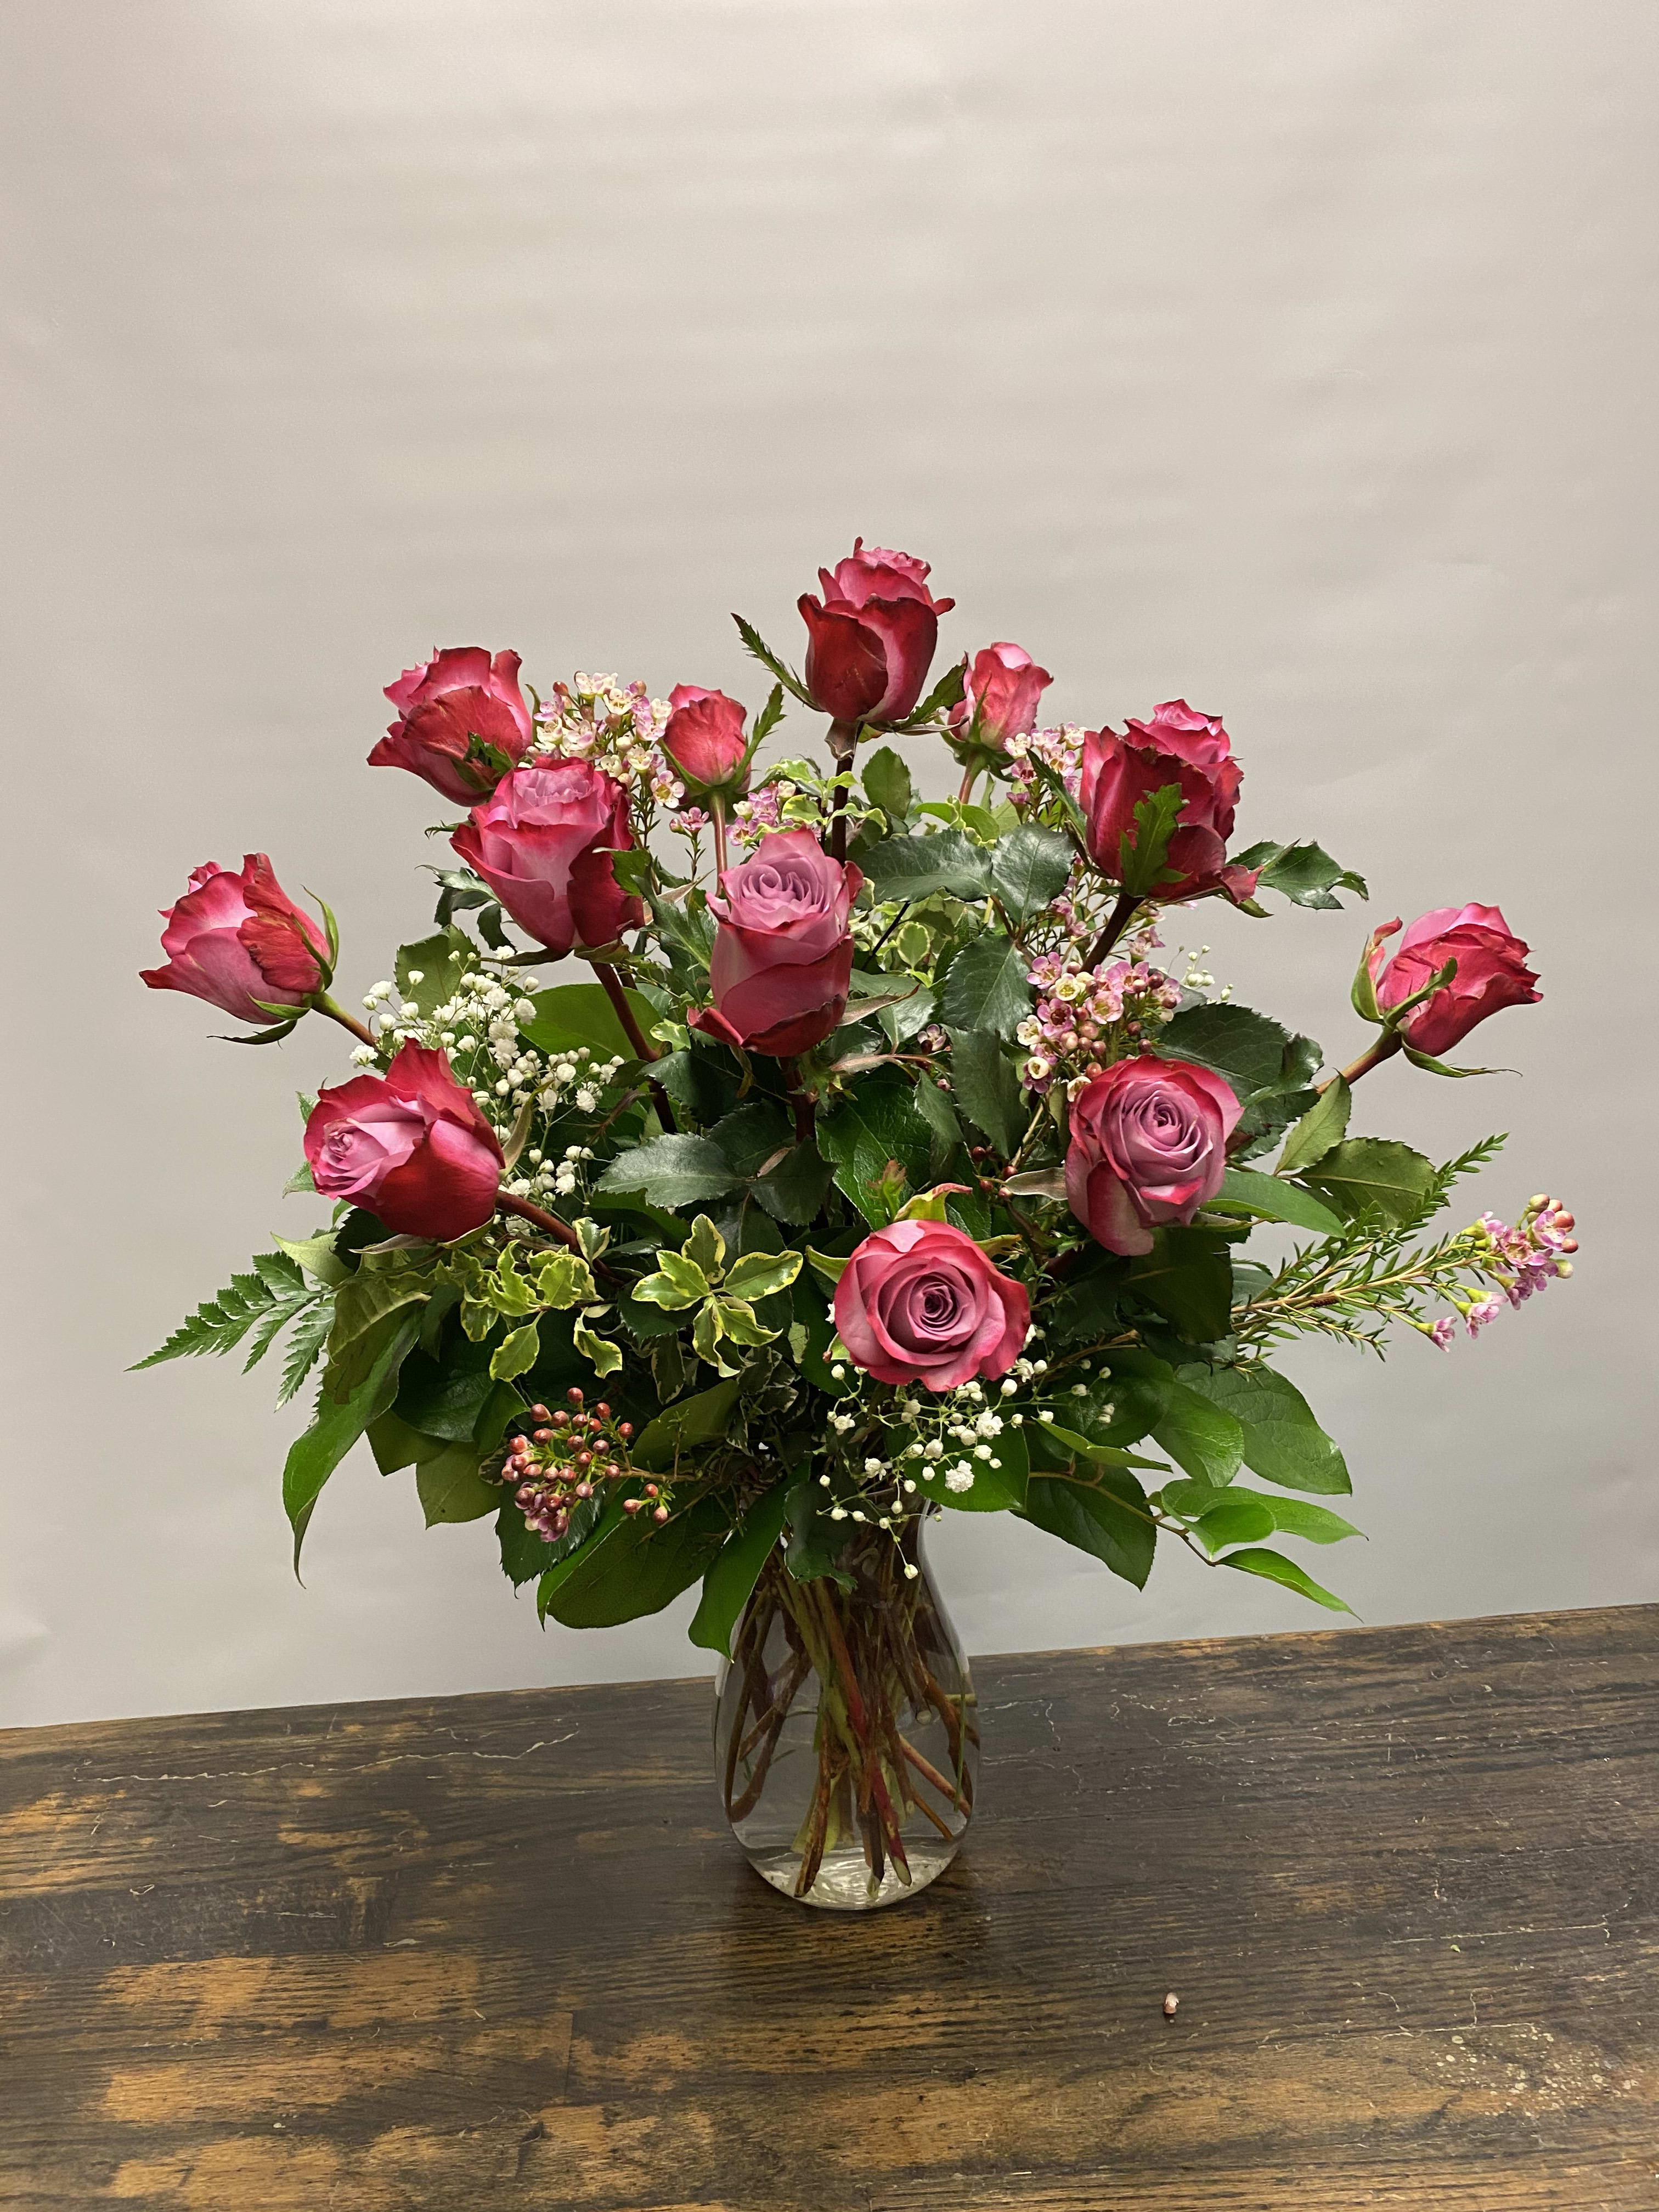  Colored Rose Arrangement - this arrangement can be in any color roses that are available. 